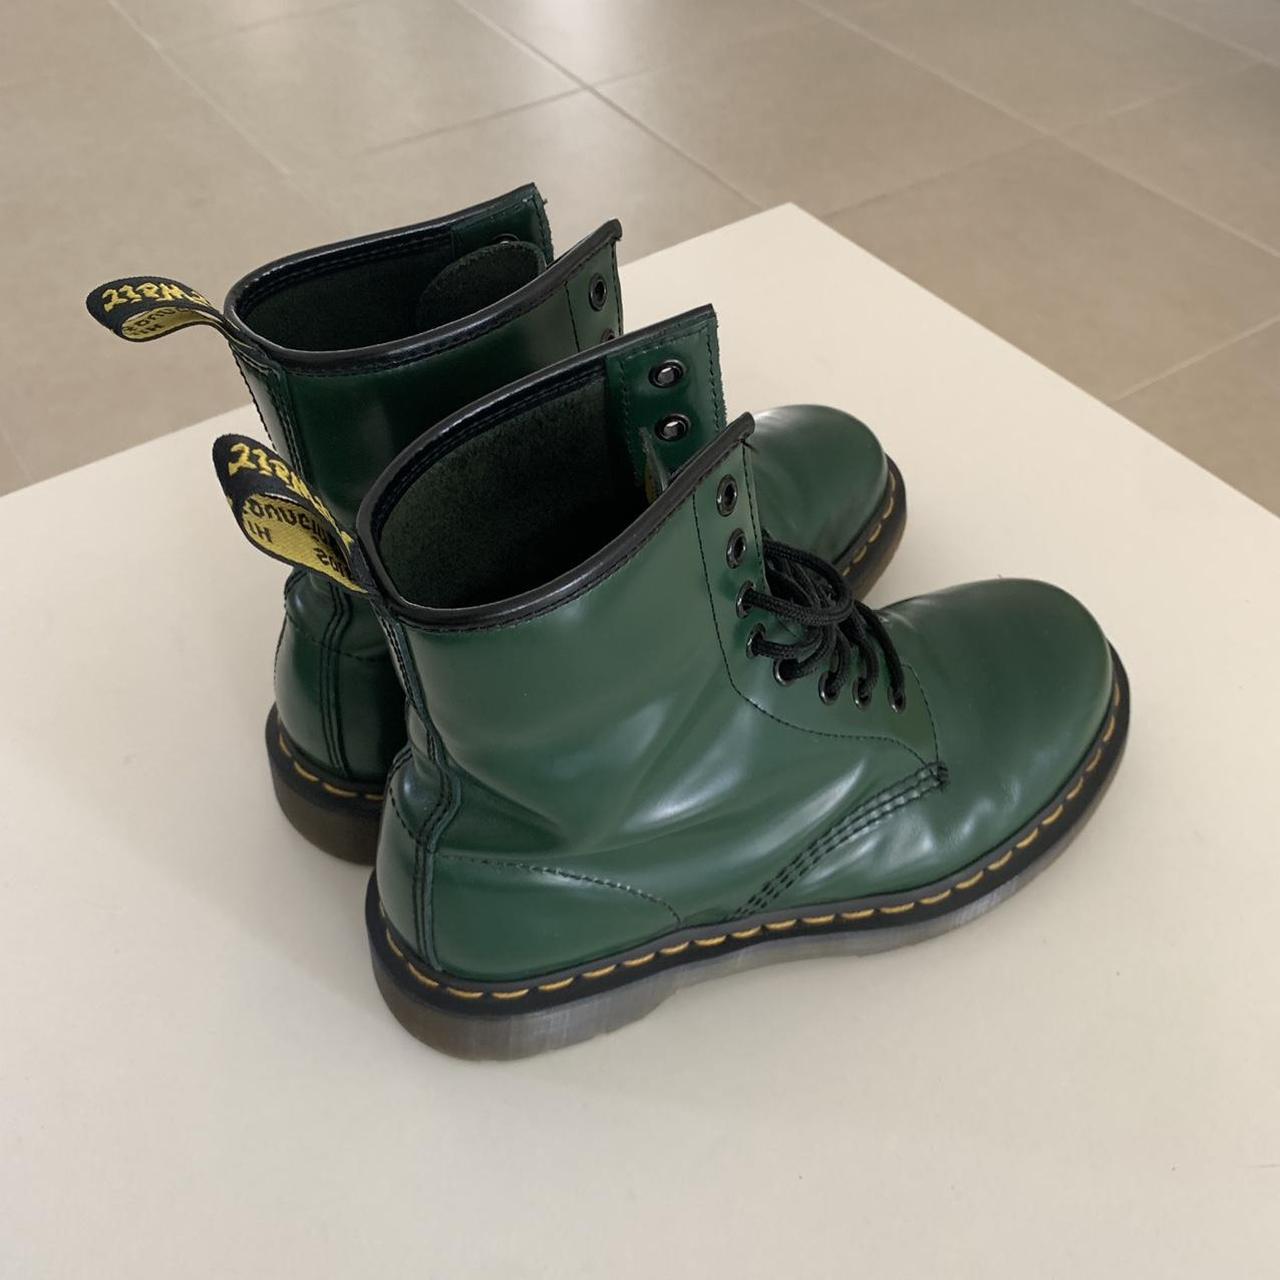 Green 1460 Smooth Dr Marten Boots. Great condition,... - Depop